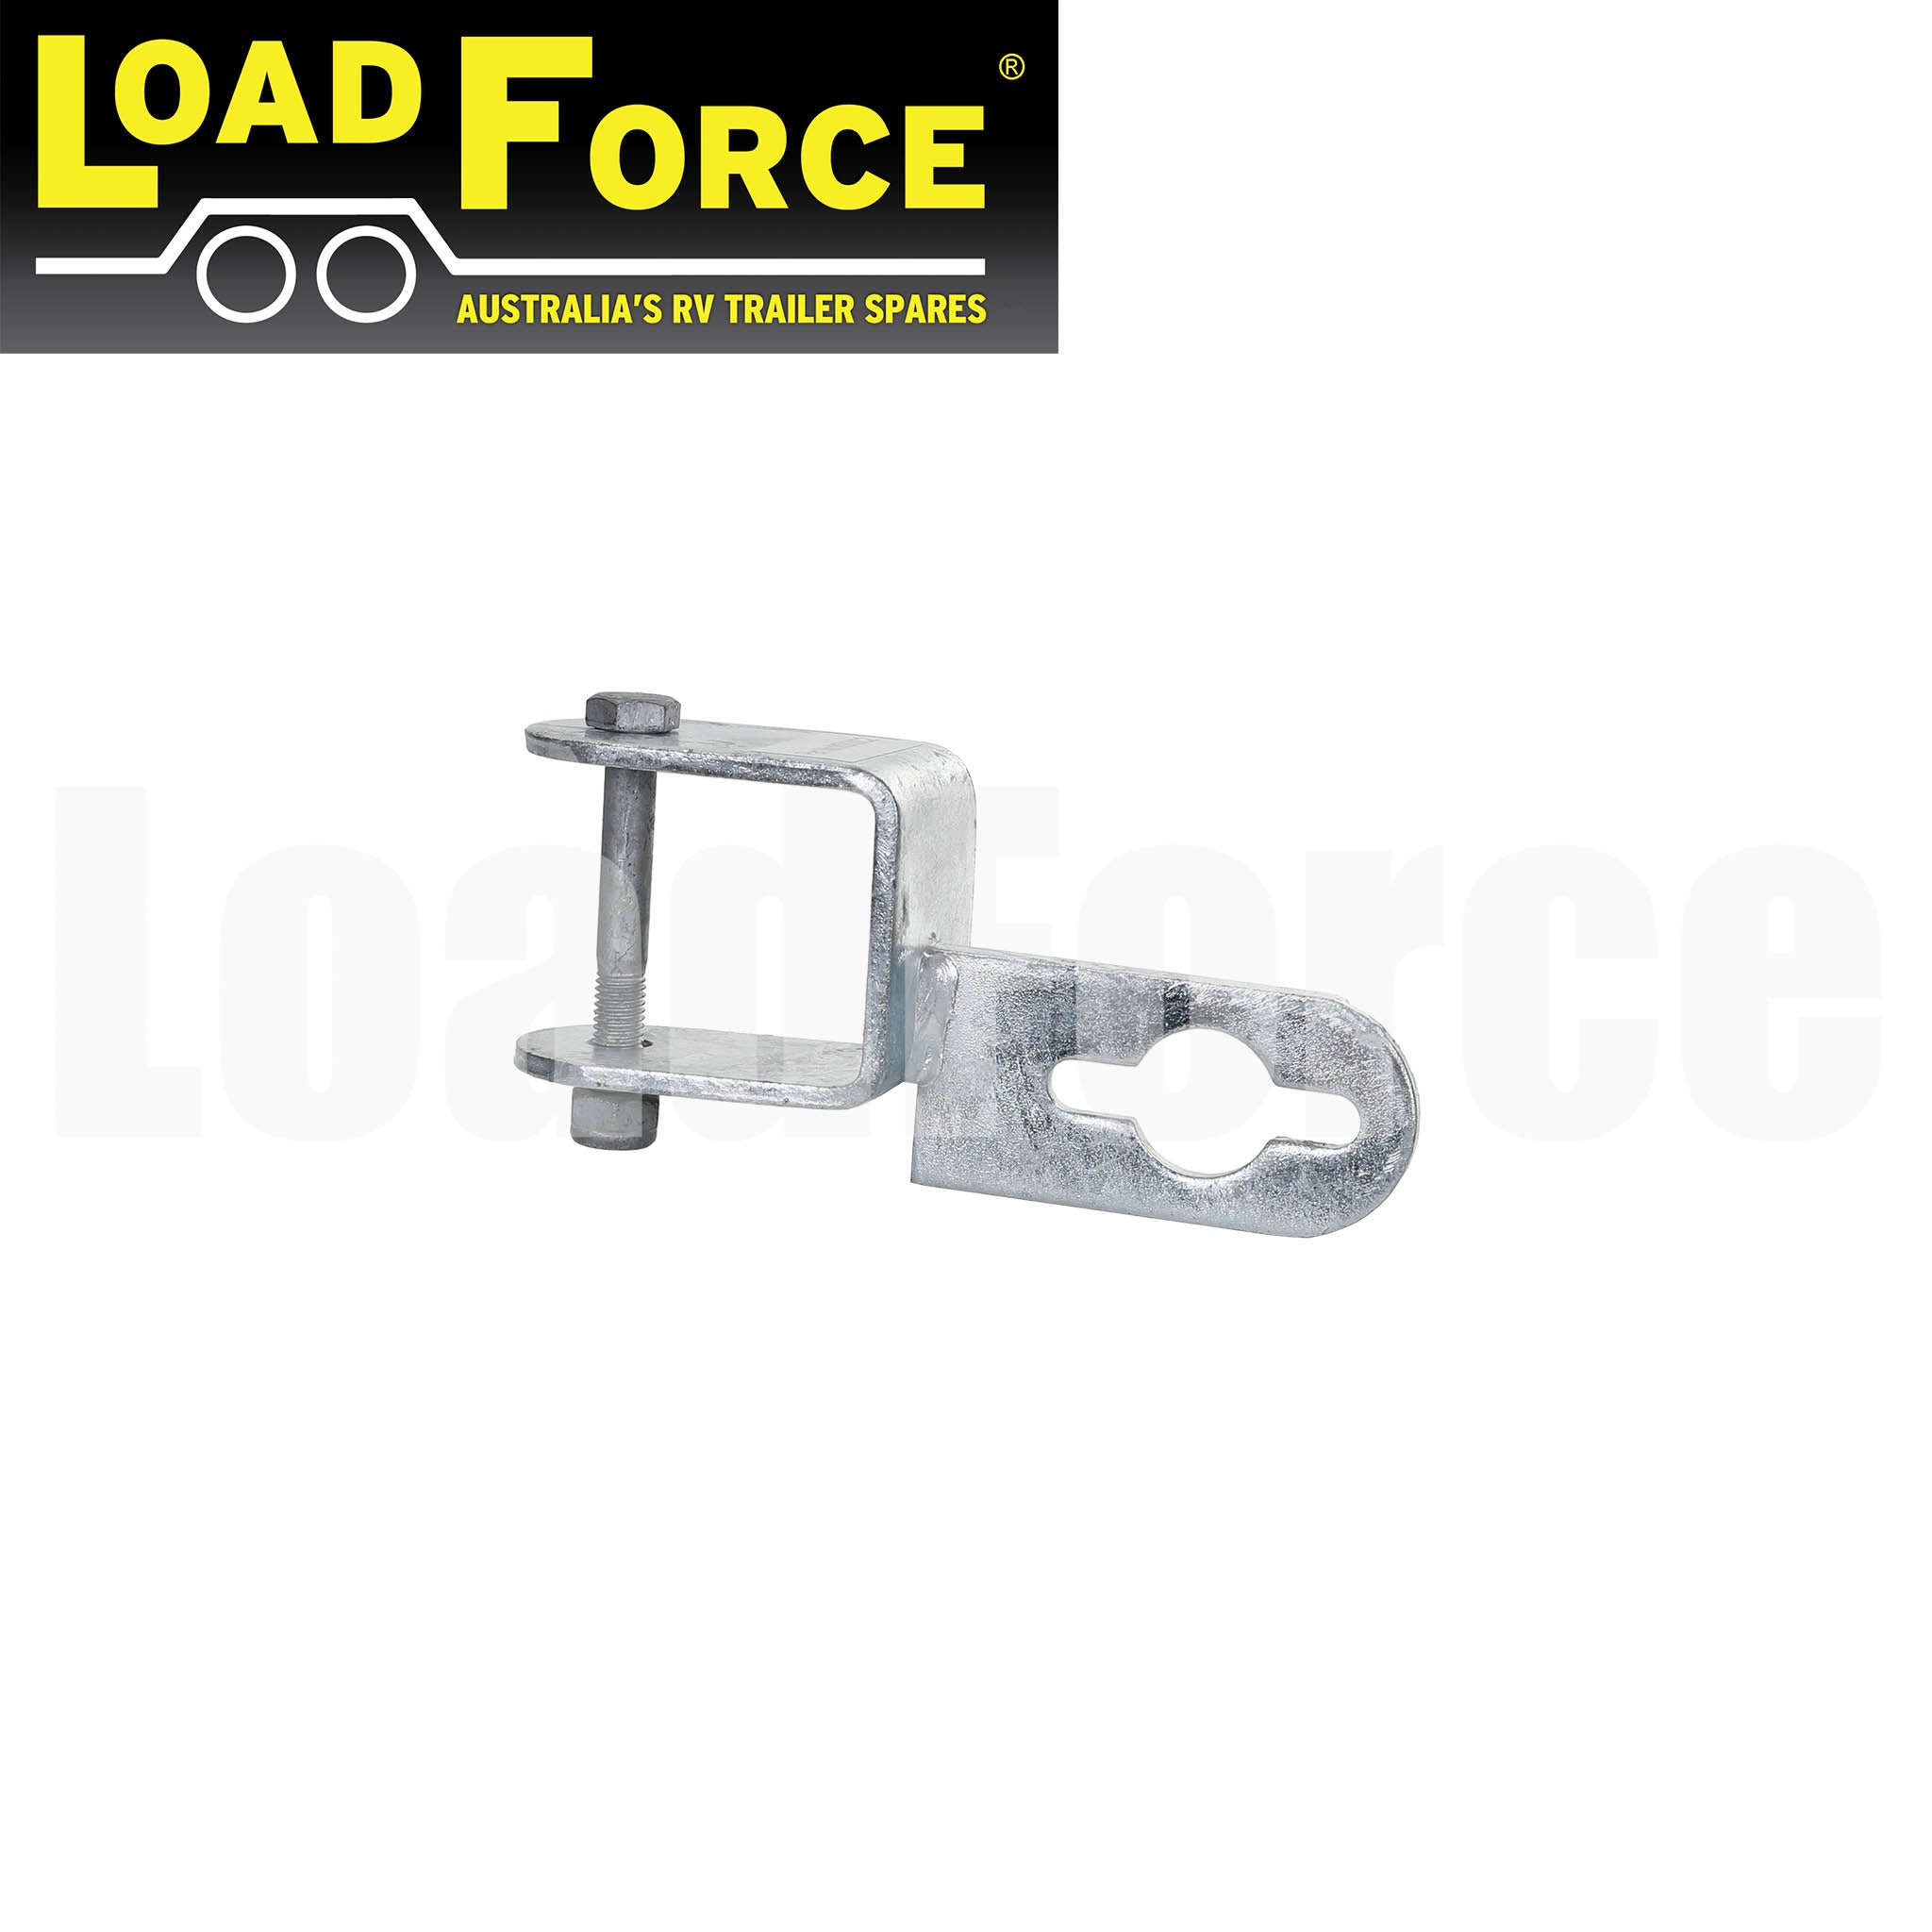 Motor support key way clamp-on 2 x 2 inch